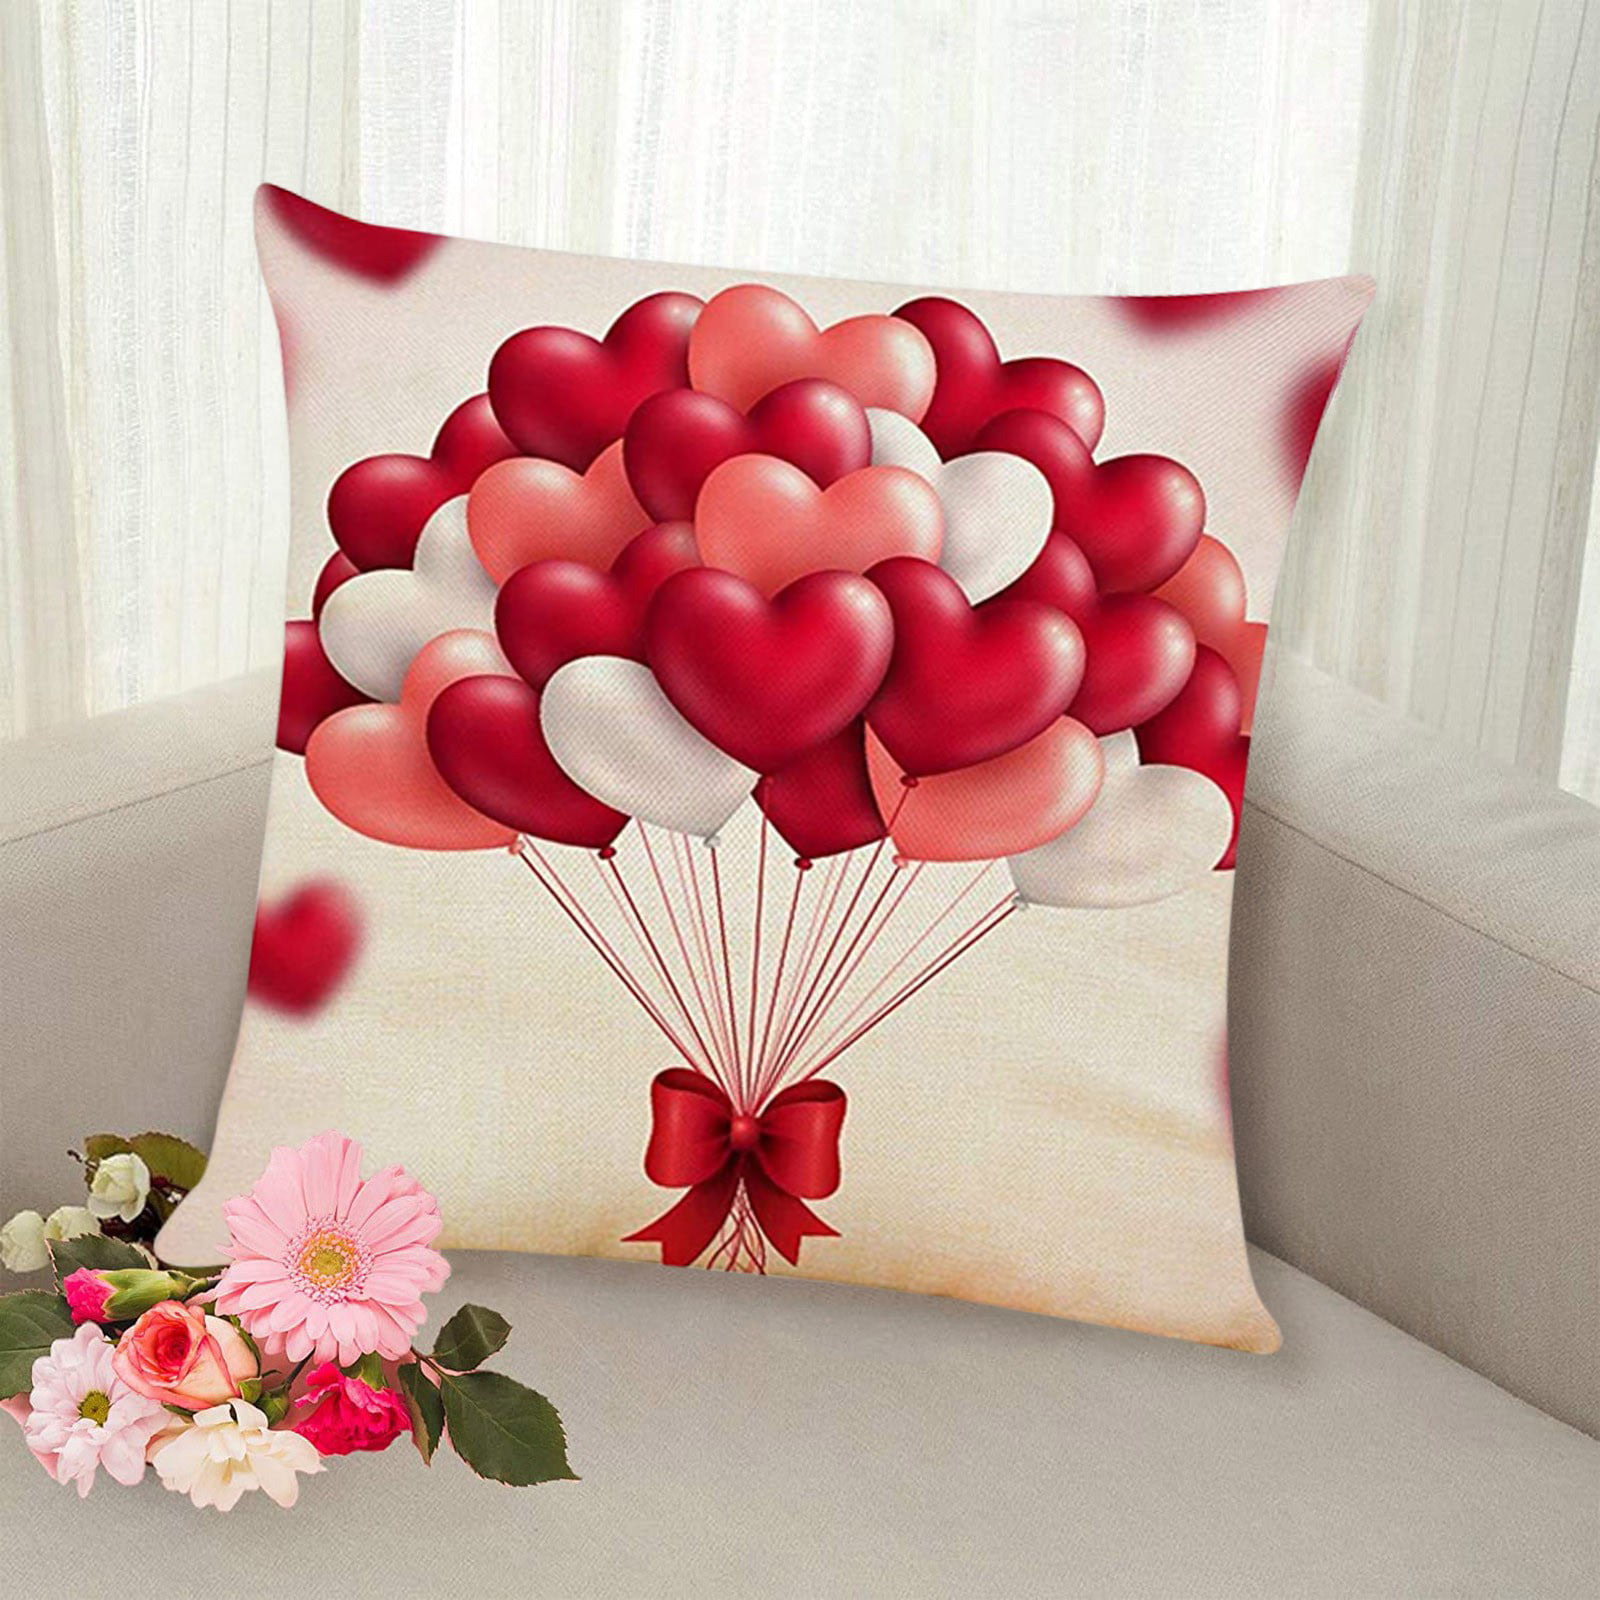 Red Love Heart Cushion Cover Pillow Case Sofa Home Valentine's Day Decor